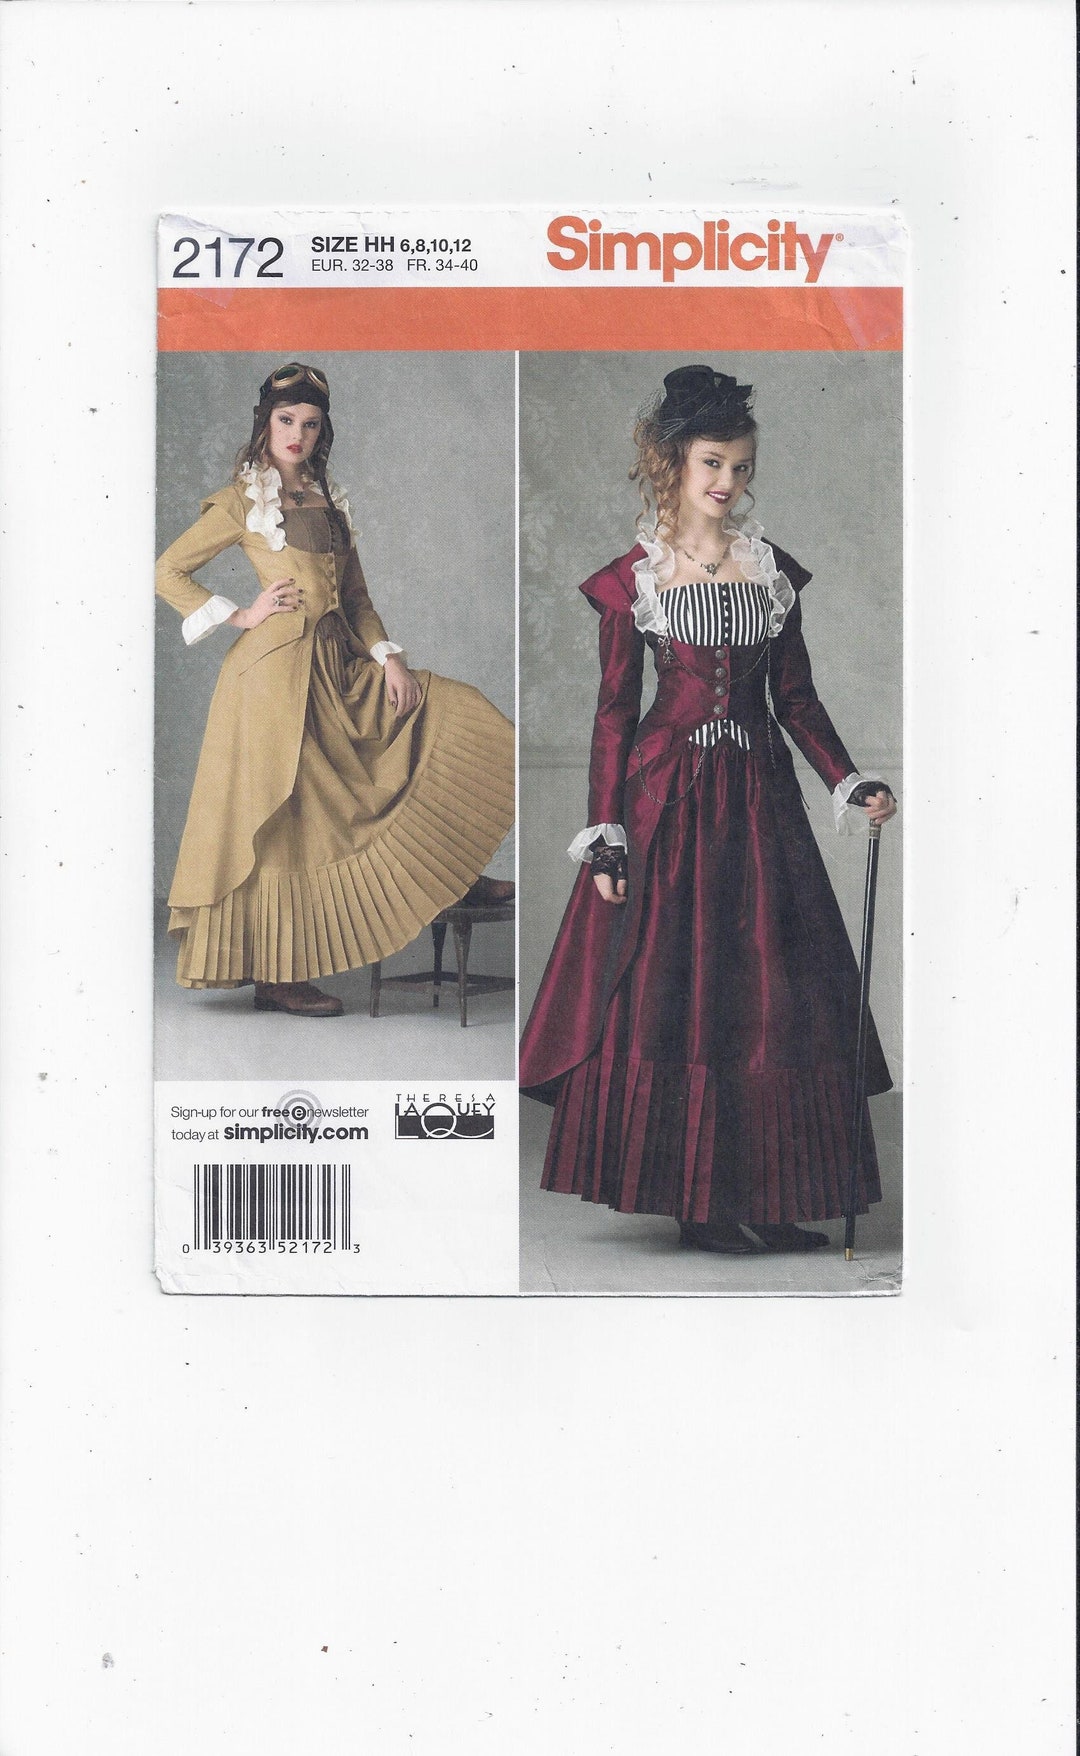 Simplicity 2172 Pattern for Misses' Victorian Costume Coat, Skirt ...